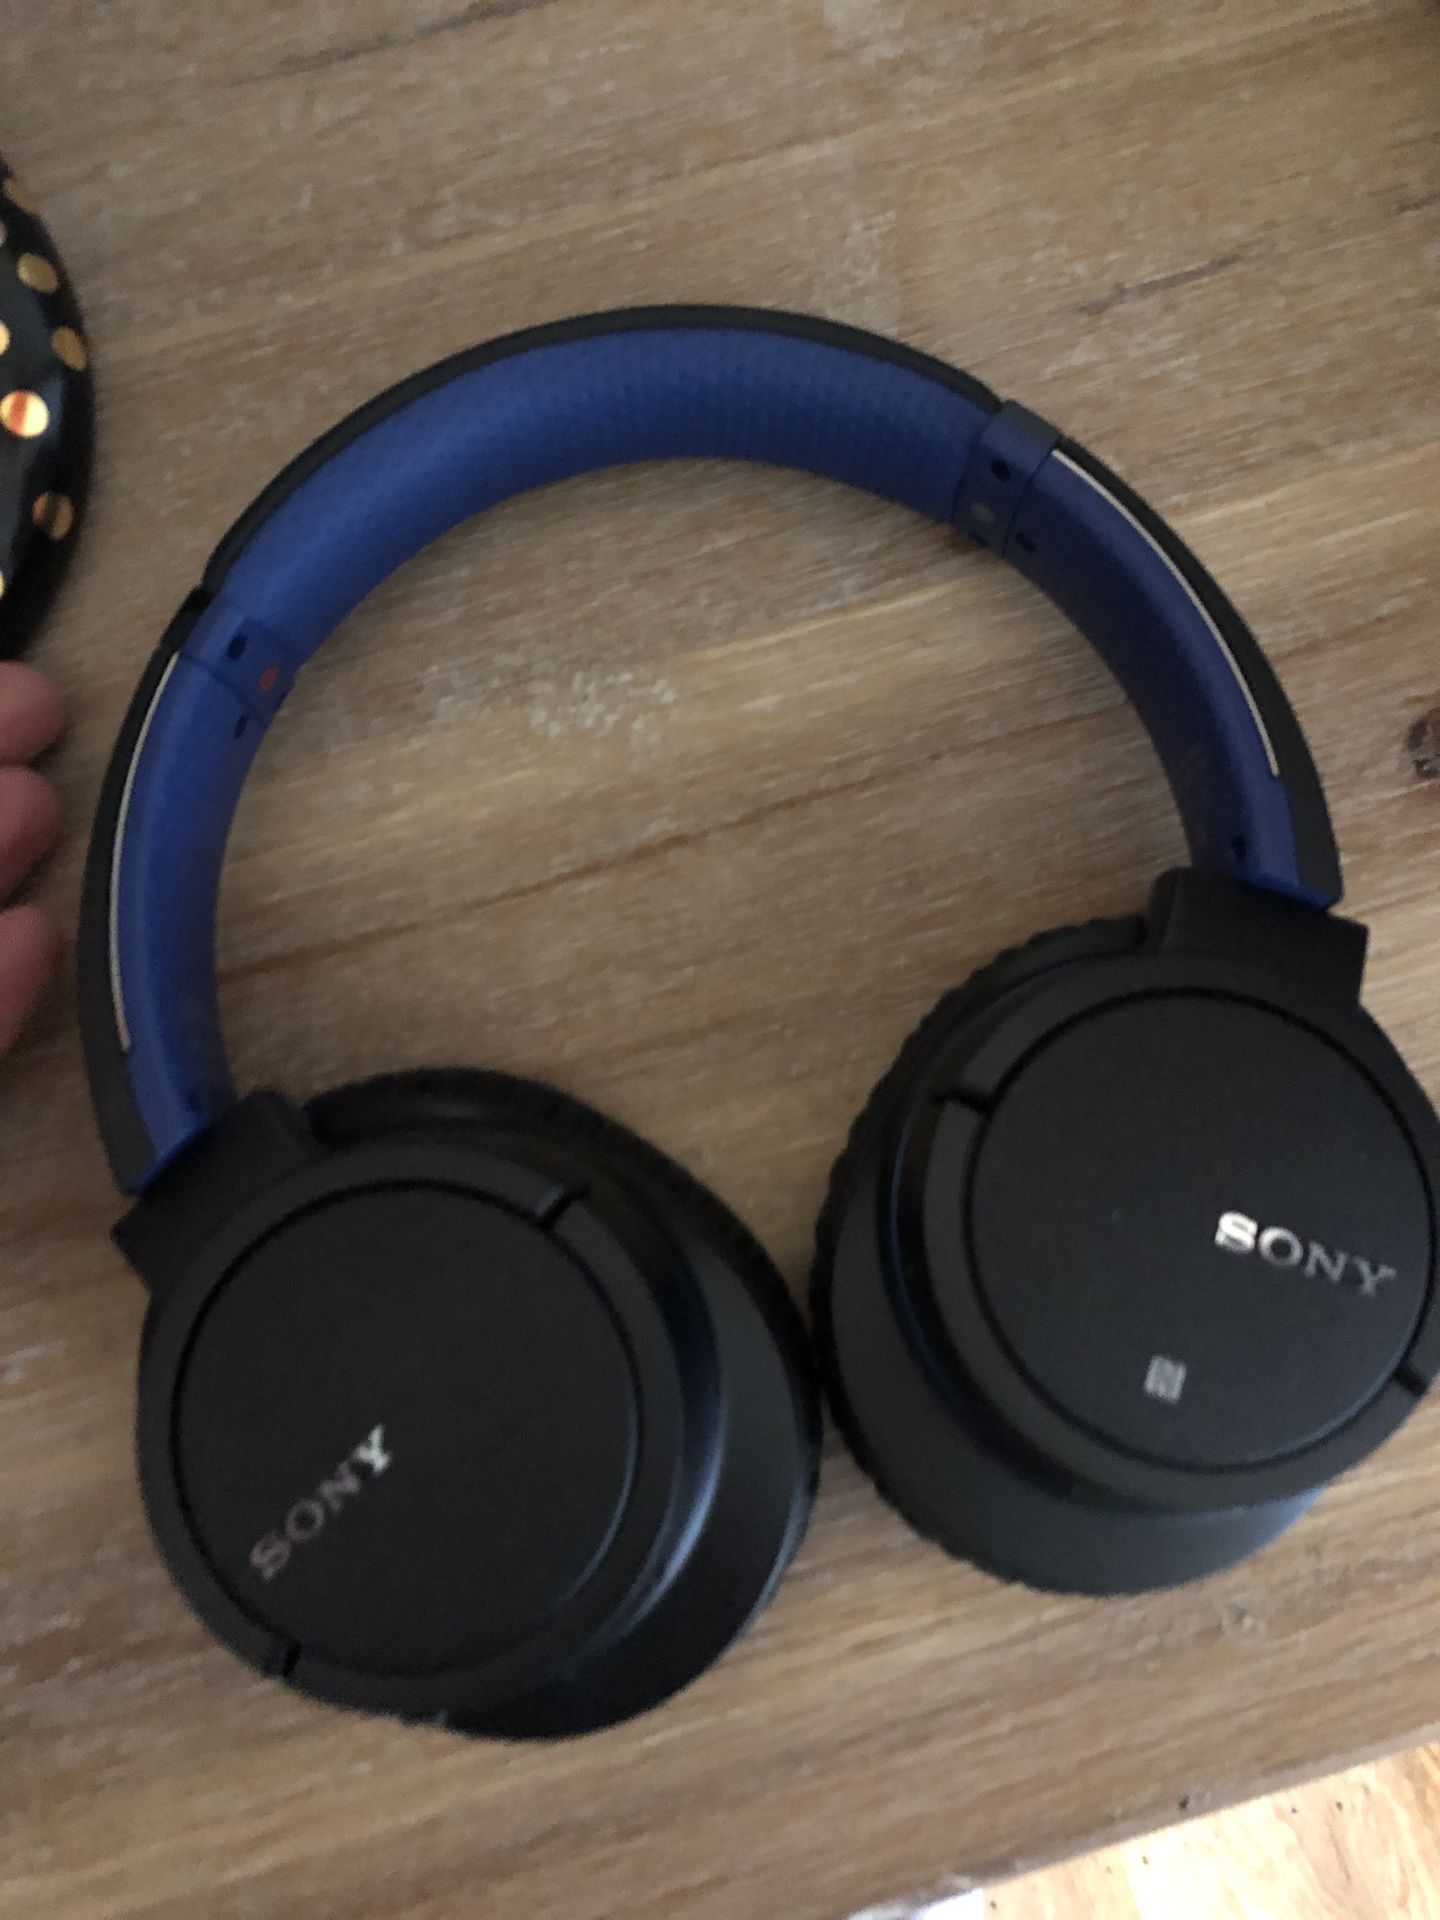 Sony wireless over the head earphones noise cancelling - Bluetooth headphones with plush earmuffs